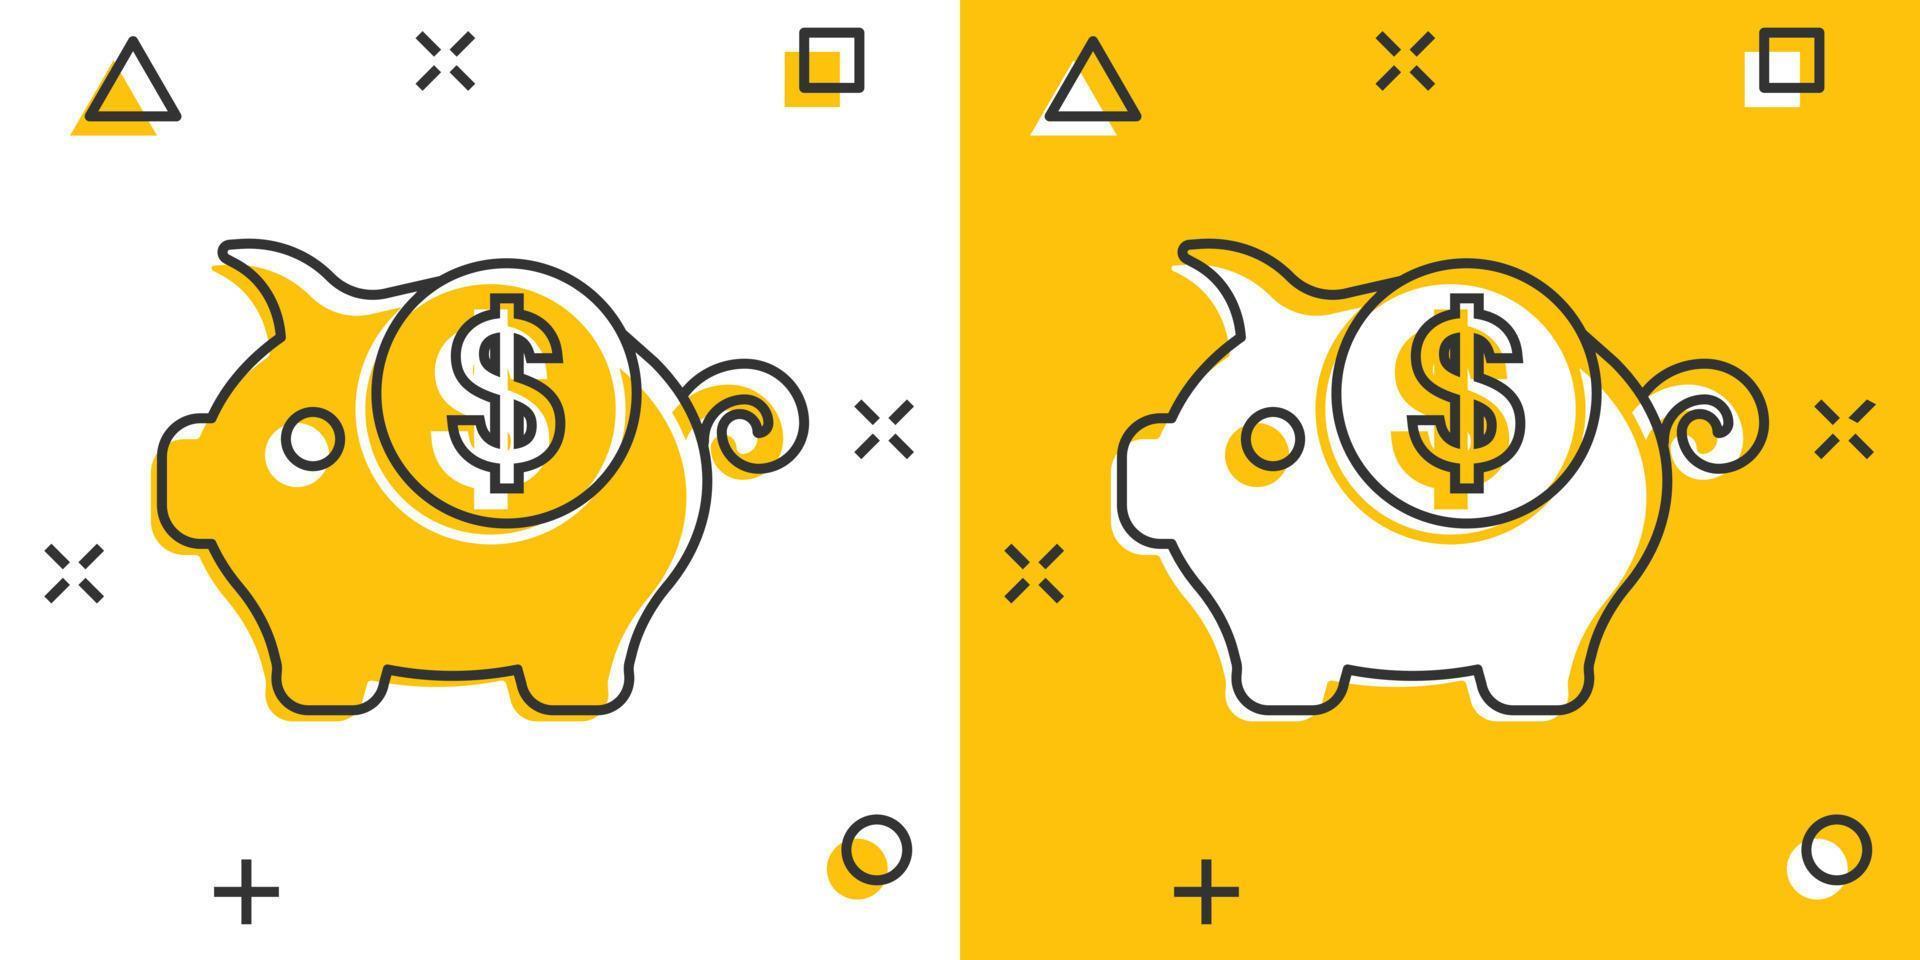 Money box icon in comic style. Pig container cartoon vector illustration on white isolated background. Piggy bank splash effect business concept.